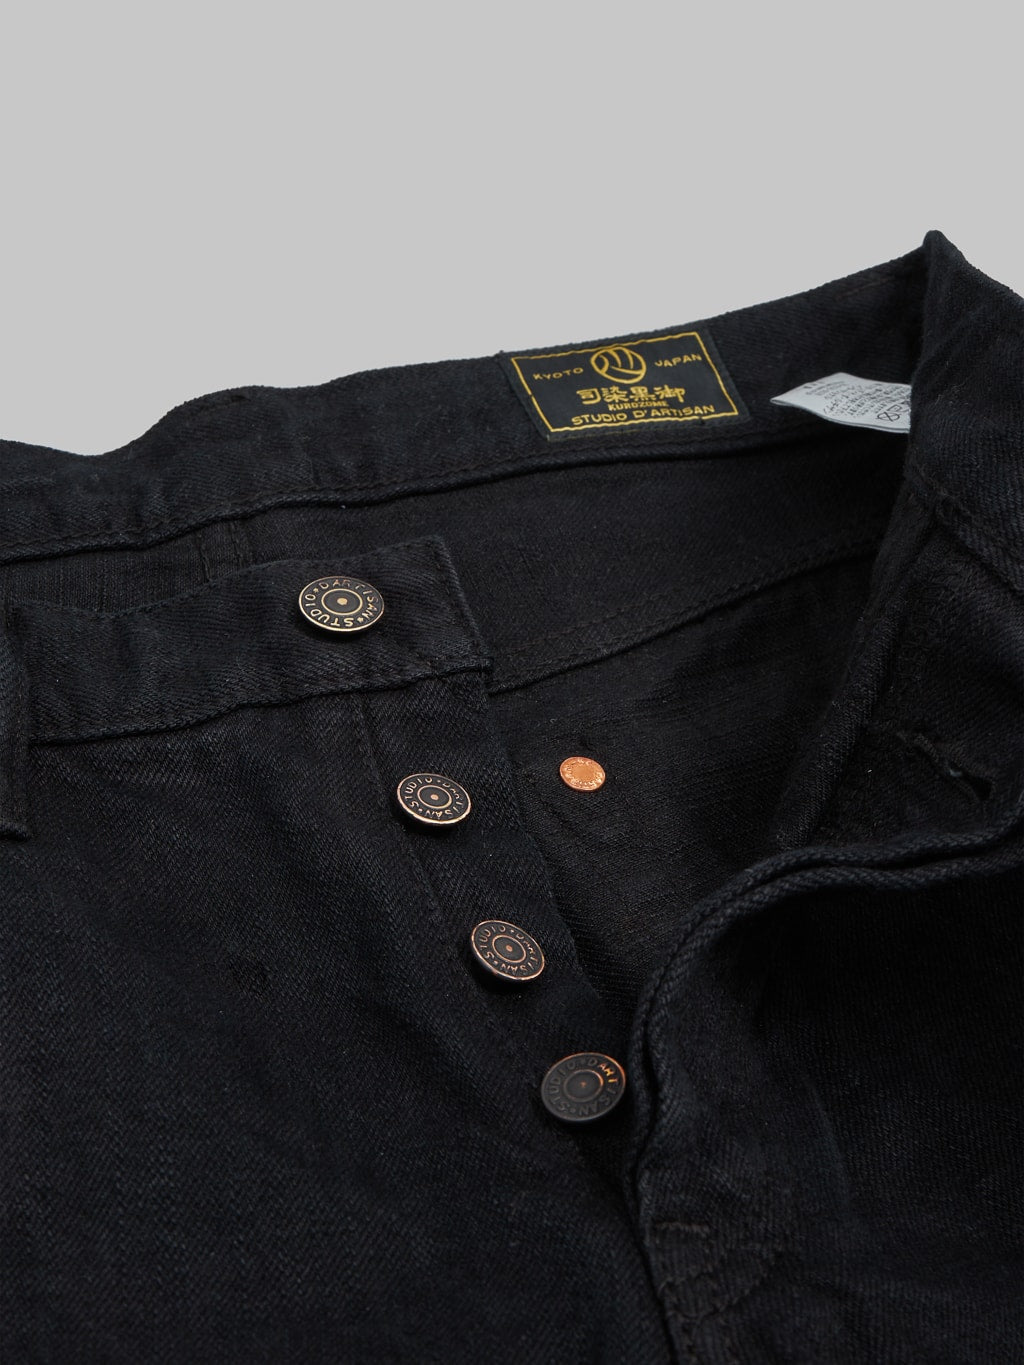 Studio DArtisan Kurozome Black 14oz Selvedge Jeans Relaxed Tapered copper buttons